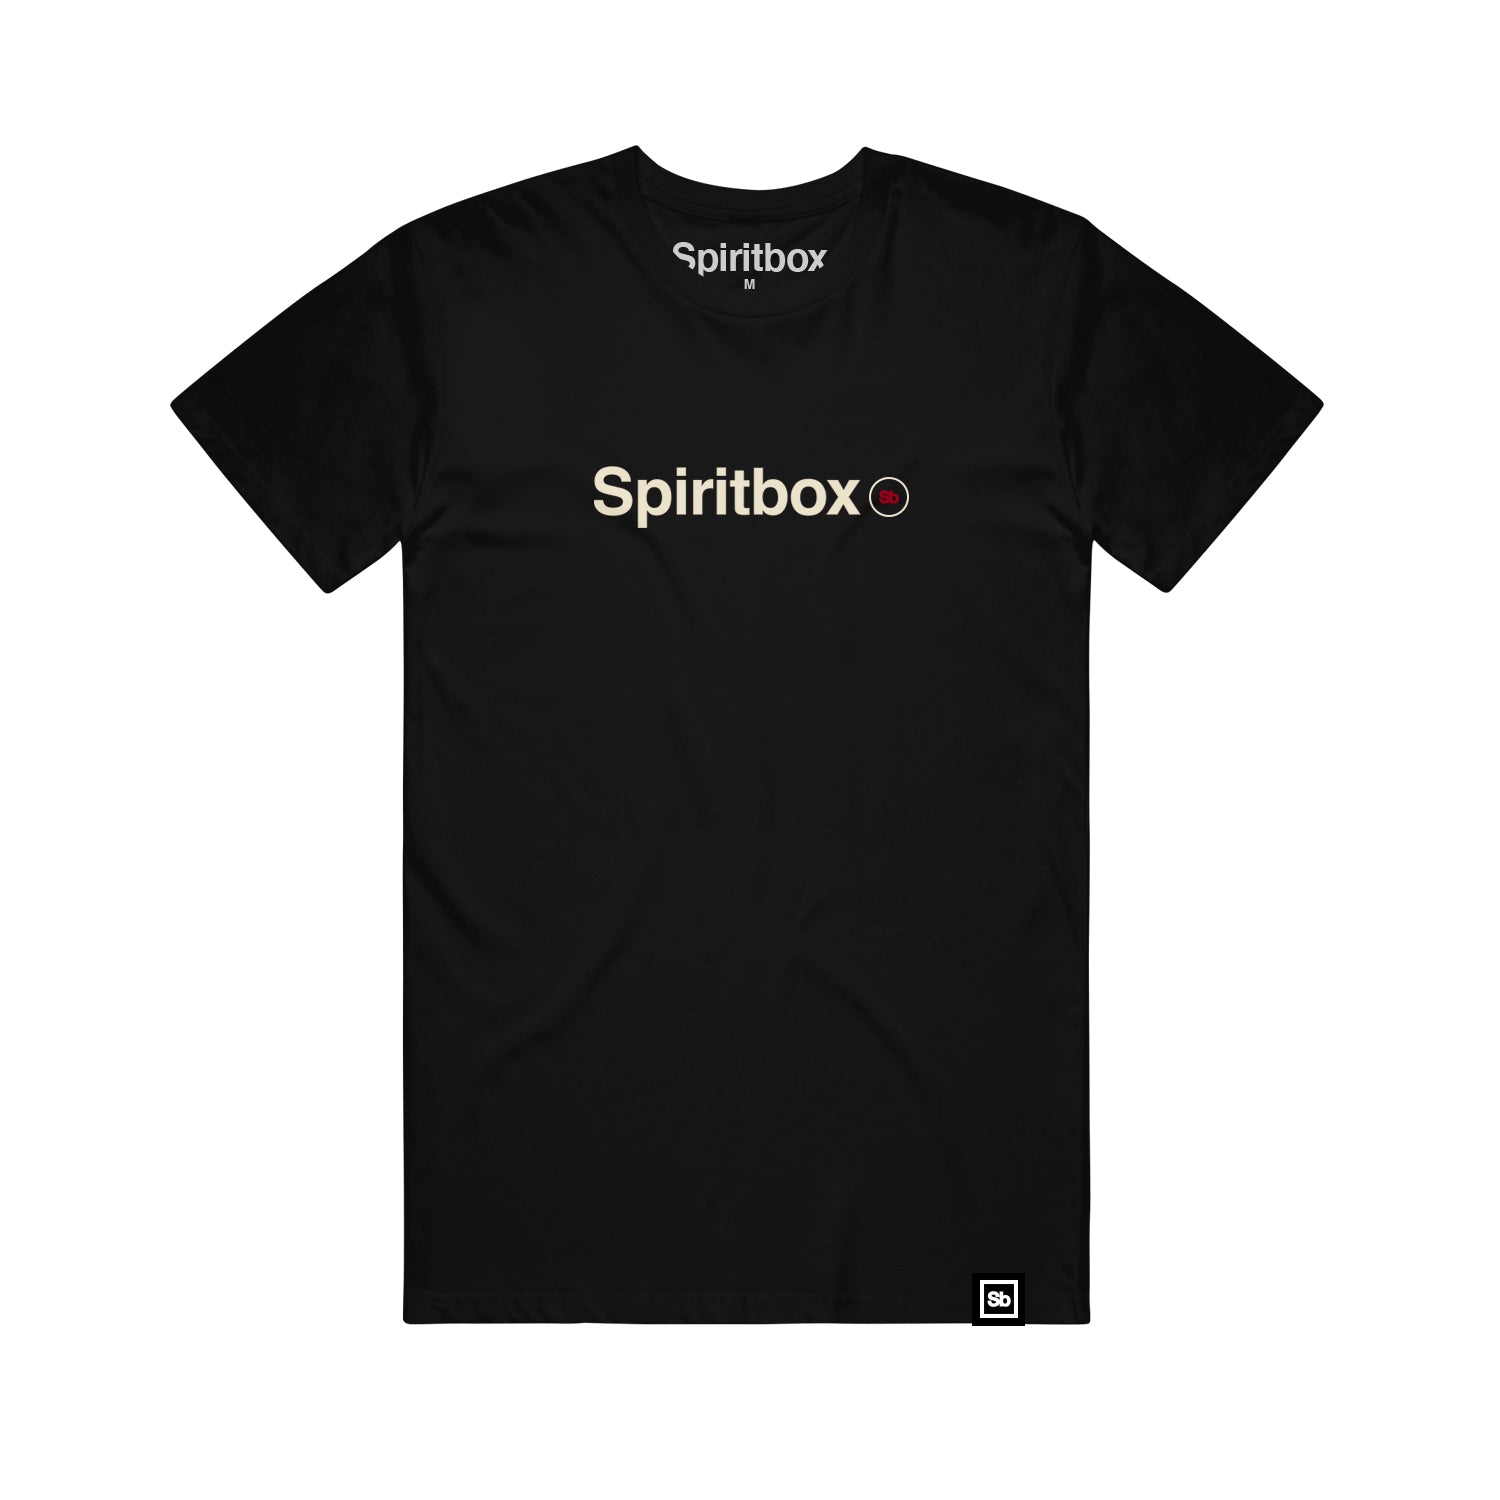 black tshirt against white background. across the center in yellow text reads spiritbox. next to that in small red text with a yellow circle around it is "sb". the bottom left corner has a small tag stitched onto it- it says "sb" in white and has a white square around it.